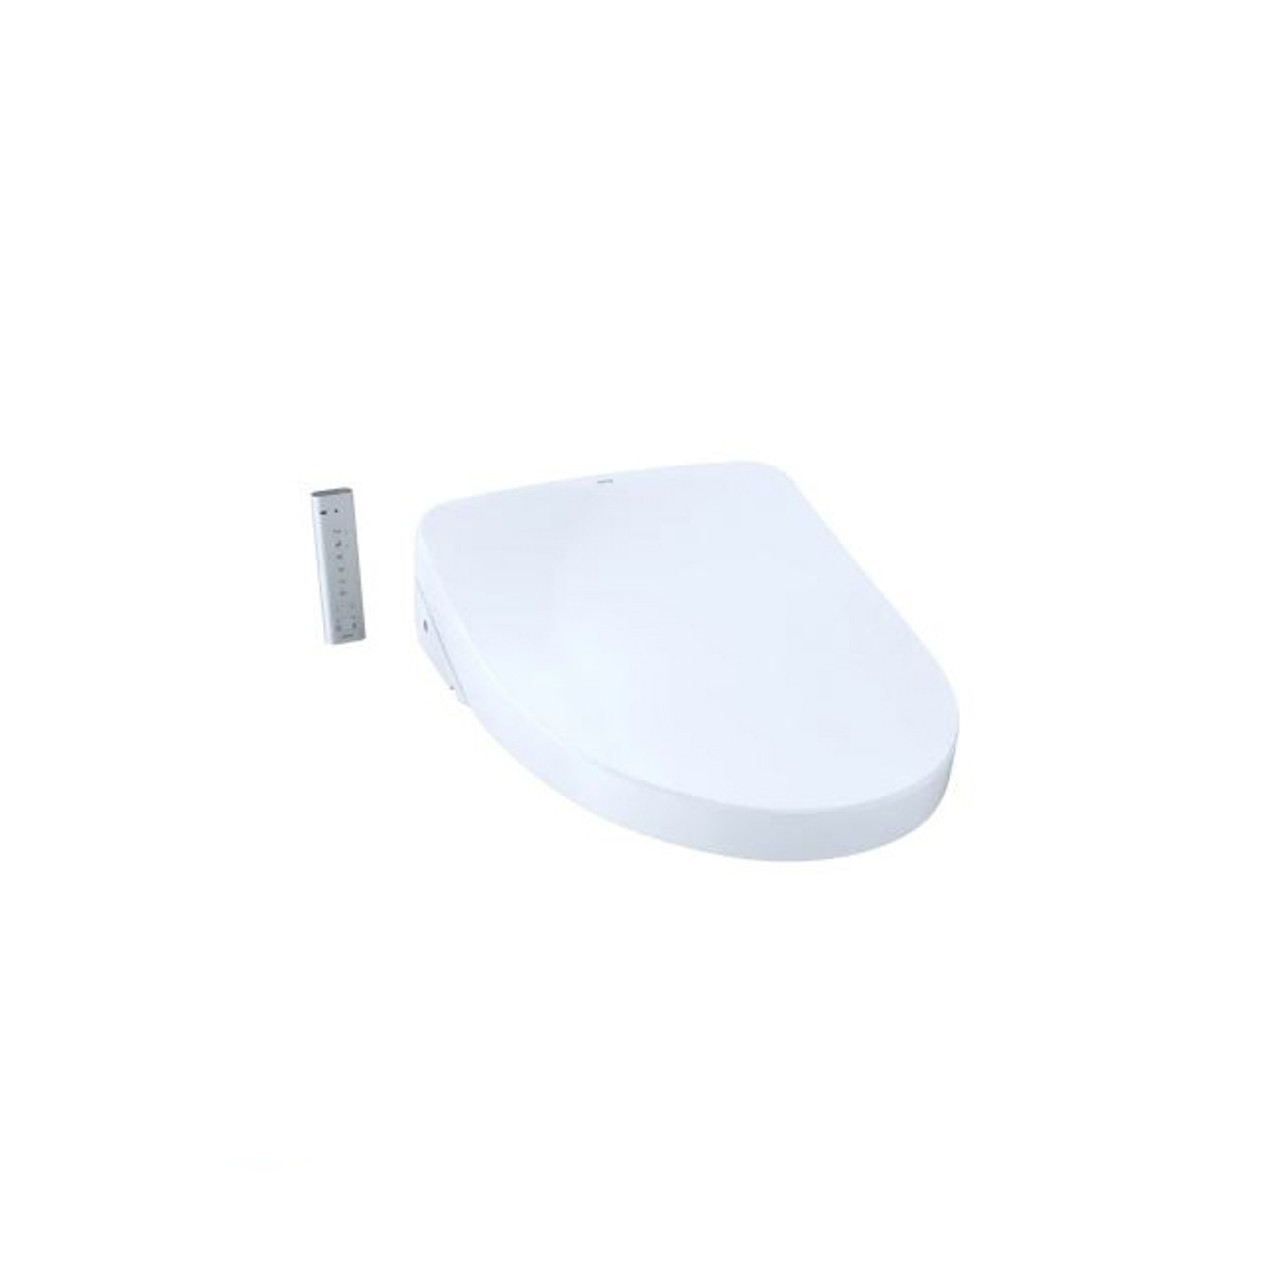 Toto Washlet S500e Elongated Bidet Seat With Heated Seat Warm Air Dryer Remote Ewater Premist And Auto Flush Toilet Compatible